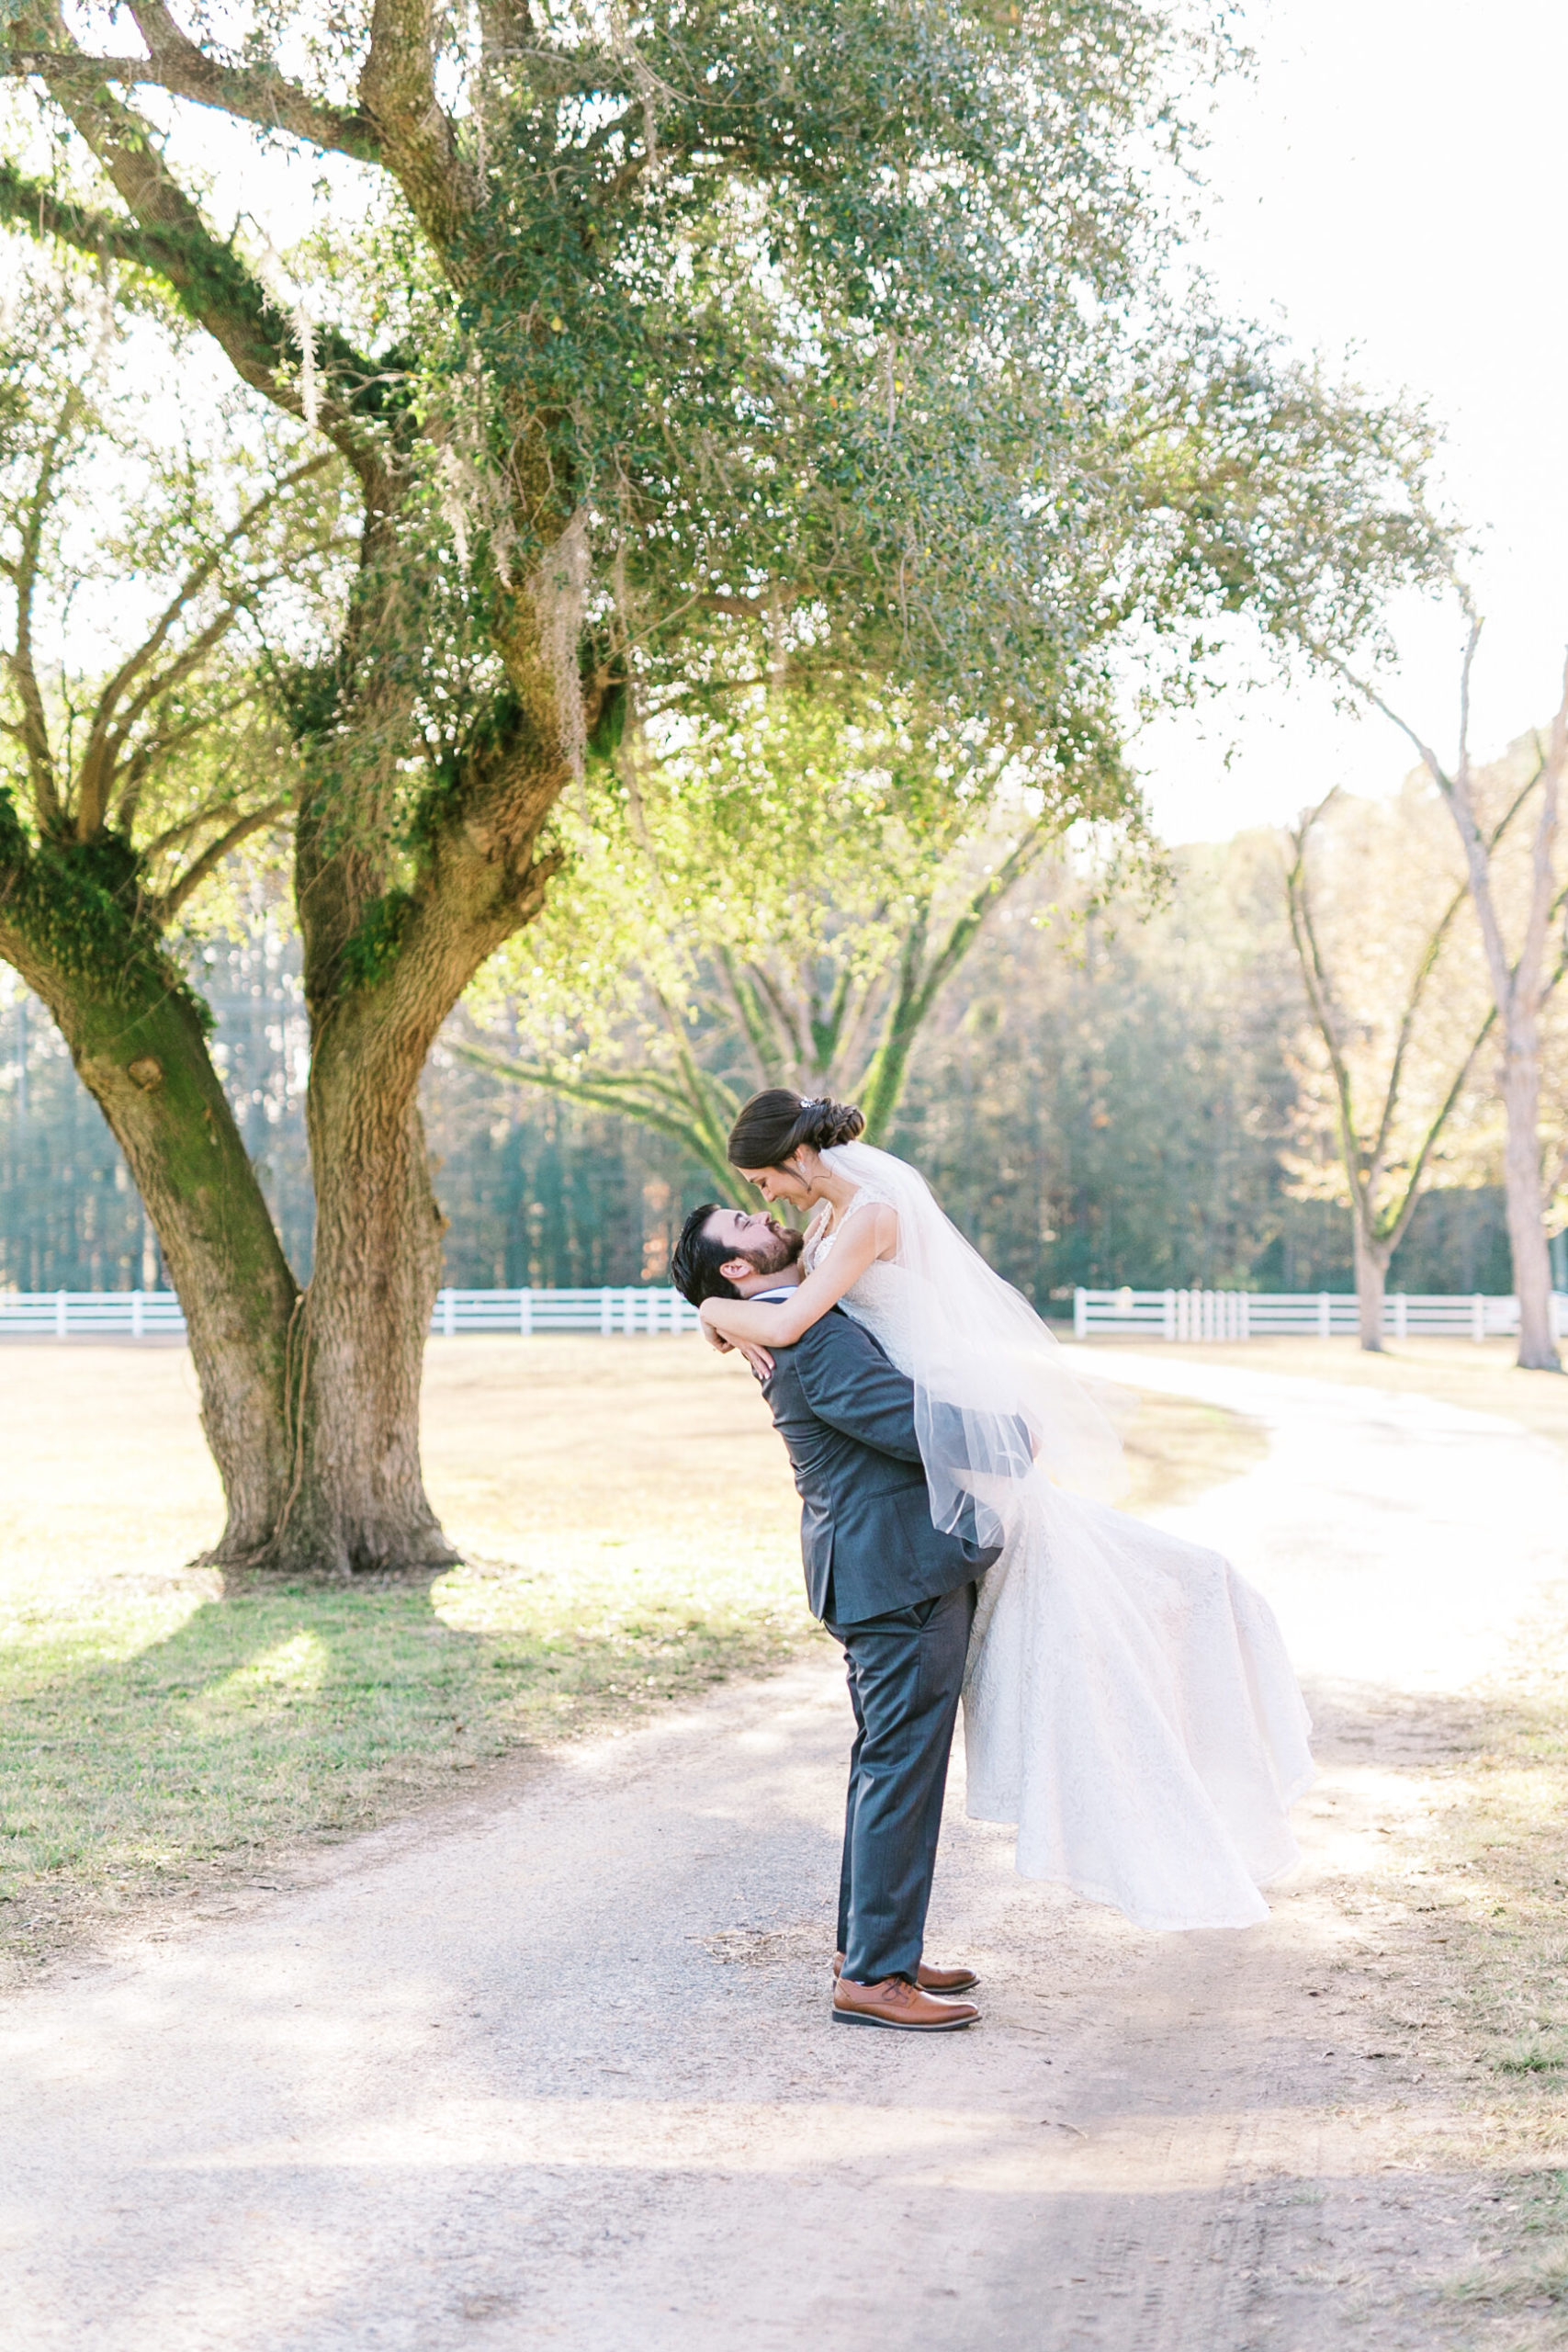 Stunning film photography portrait of the couple on their South Carolina wedding day.